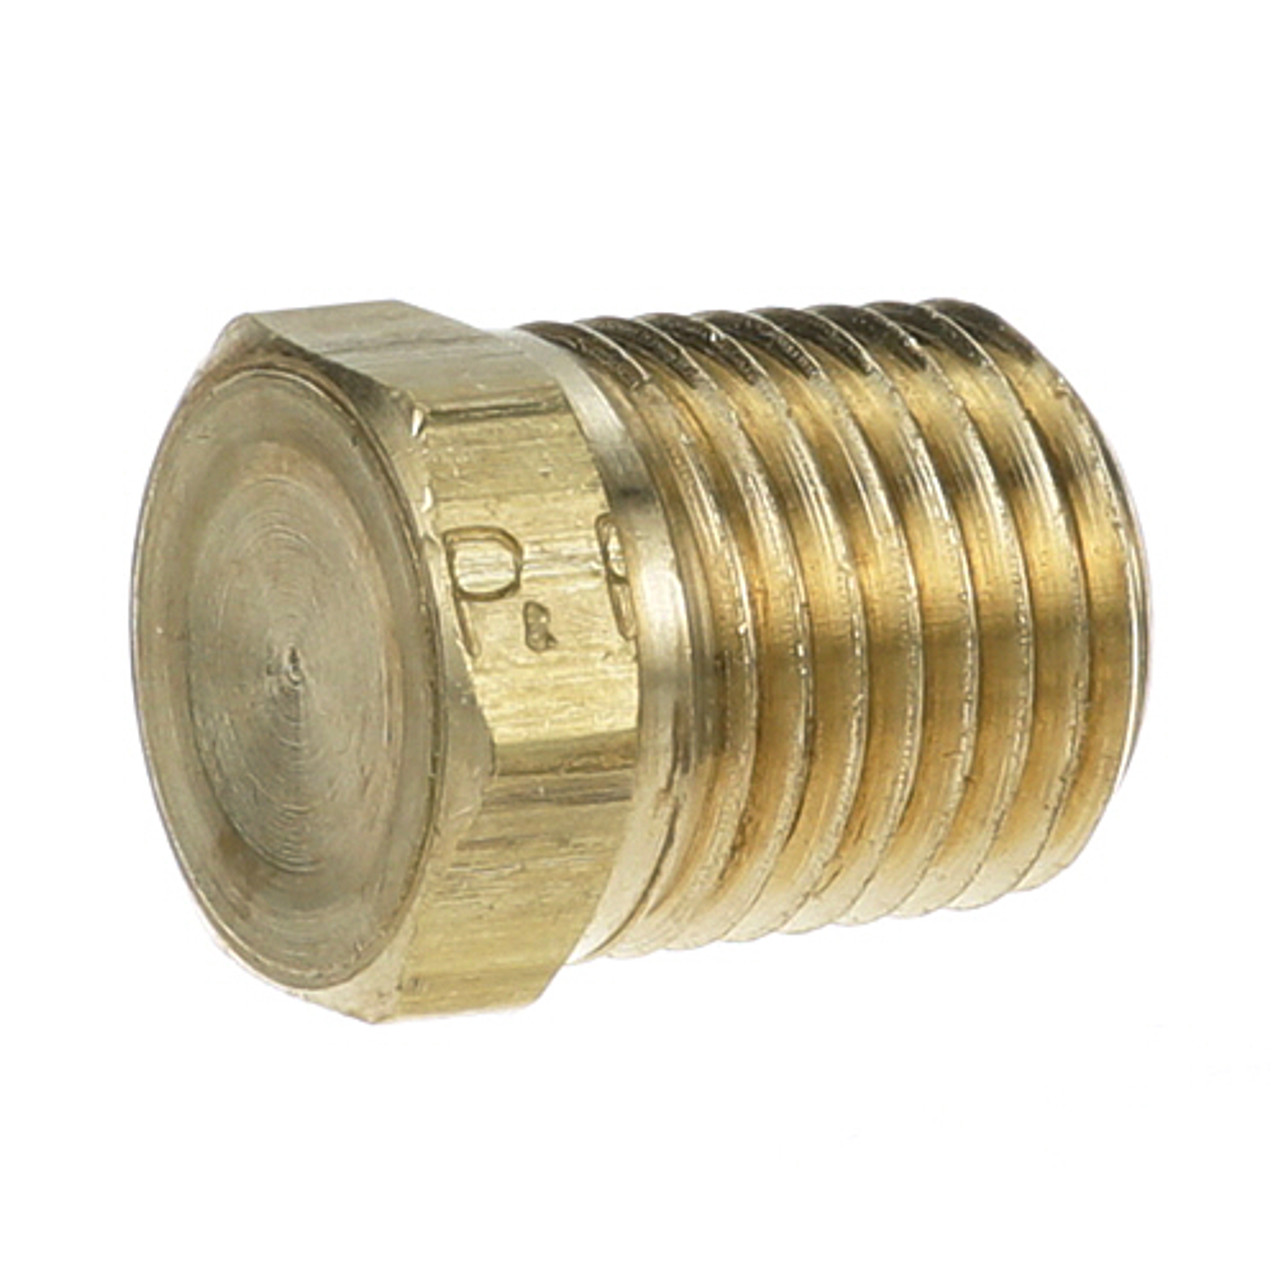 Plug 1/4 - Replacement Part For Blodgett R8183